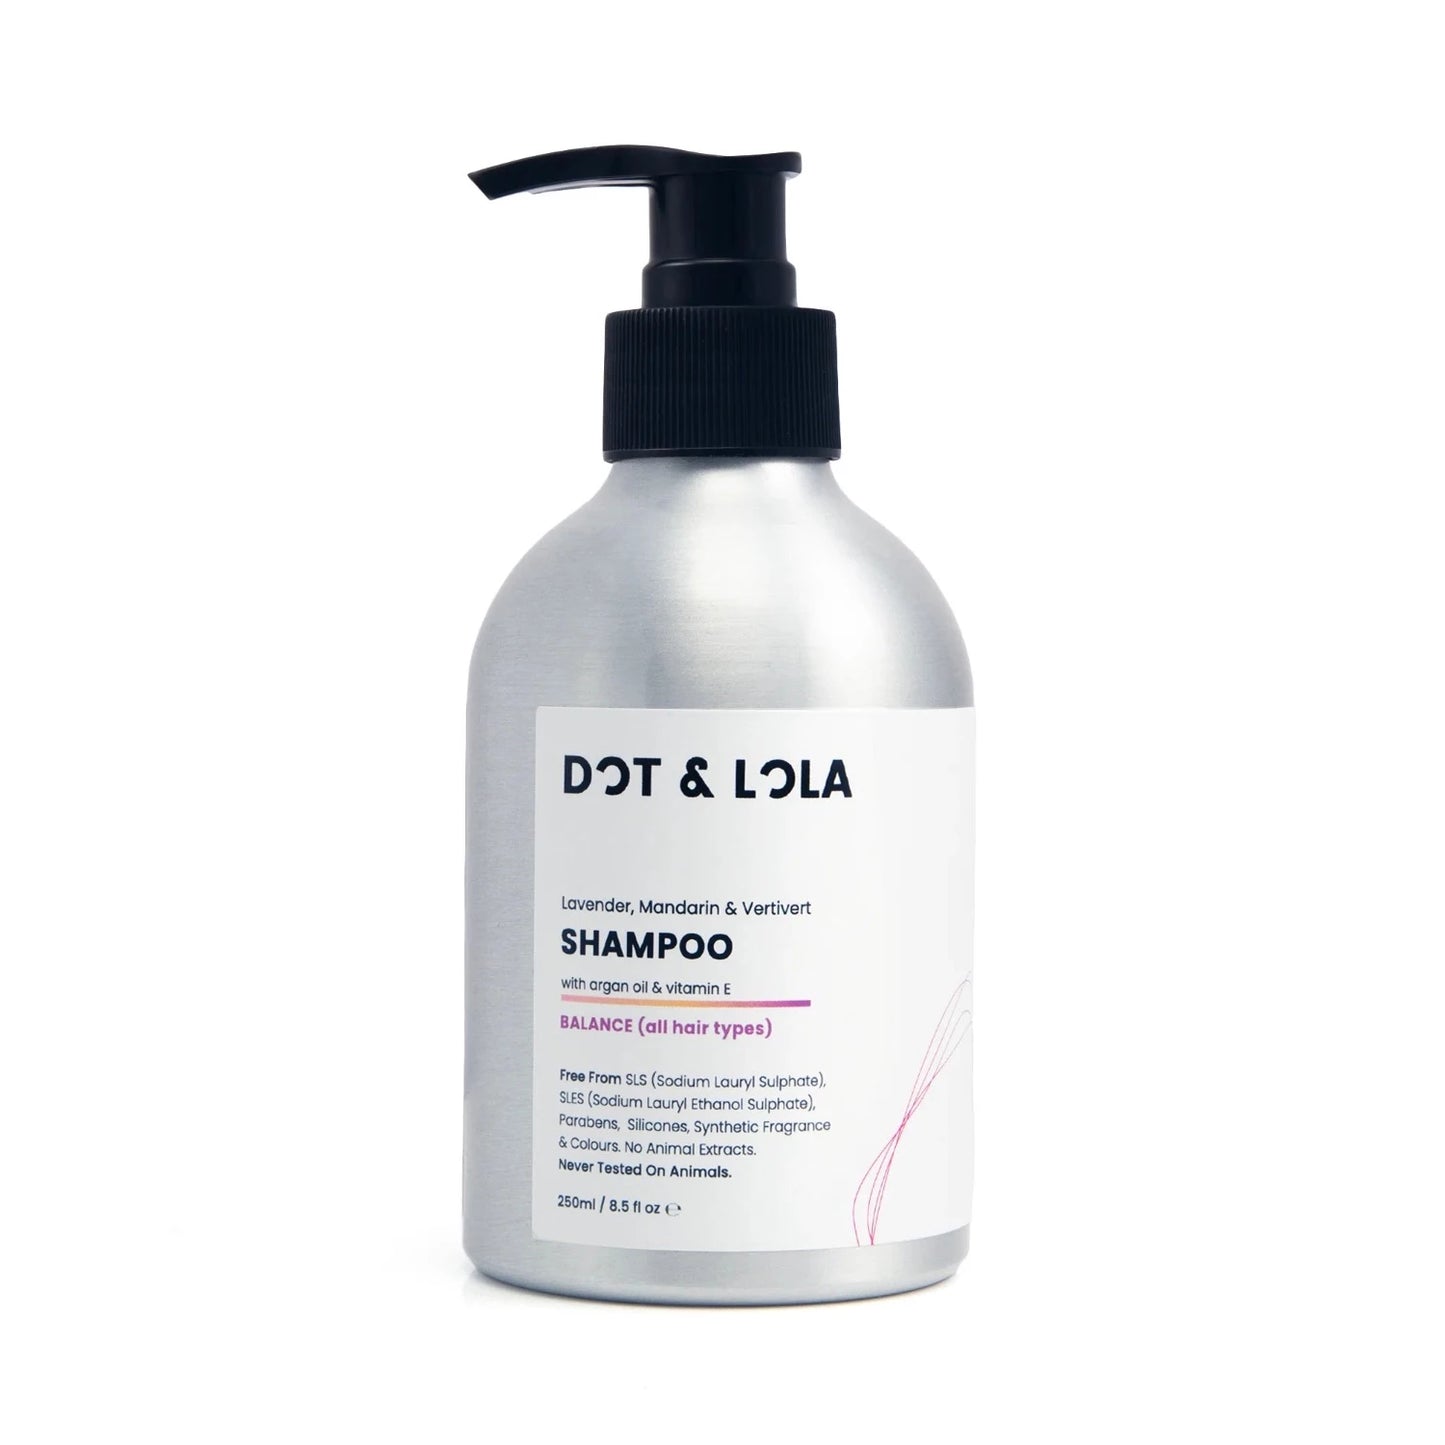 DOT & LOLA Balance Shampoo With Lavender, Mandarin & Vertivert is special combination of lavender and mandarin essential oils pacifies the senses while argan oil and vitamin E perform to leave hair looking and feeling its best. 